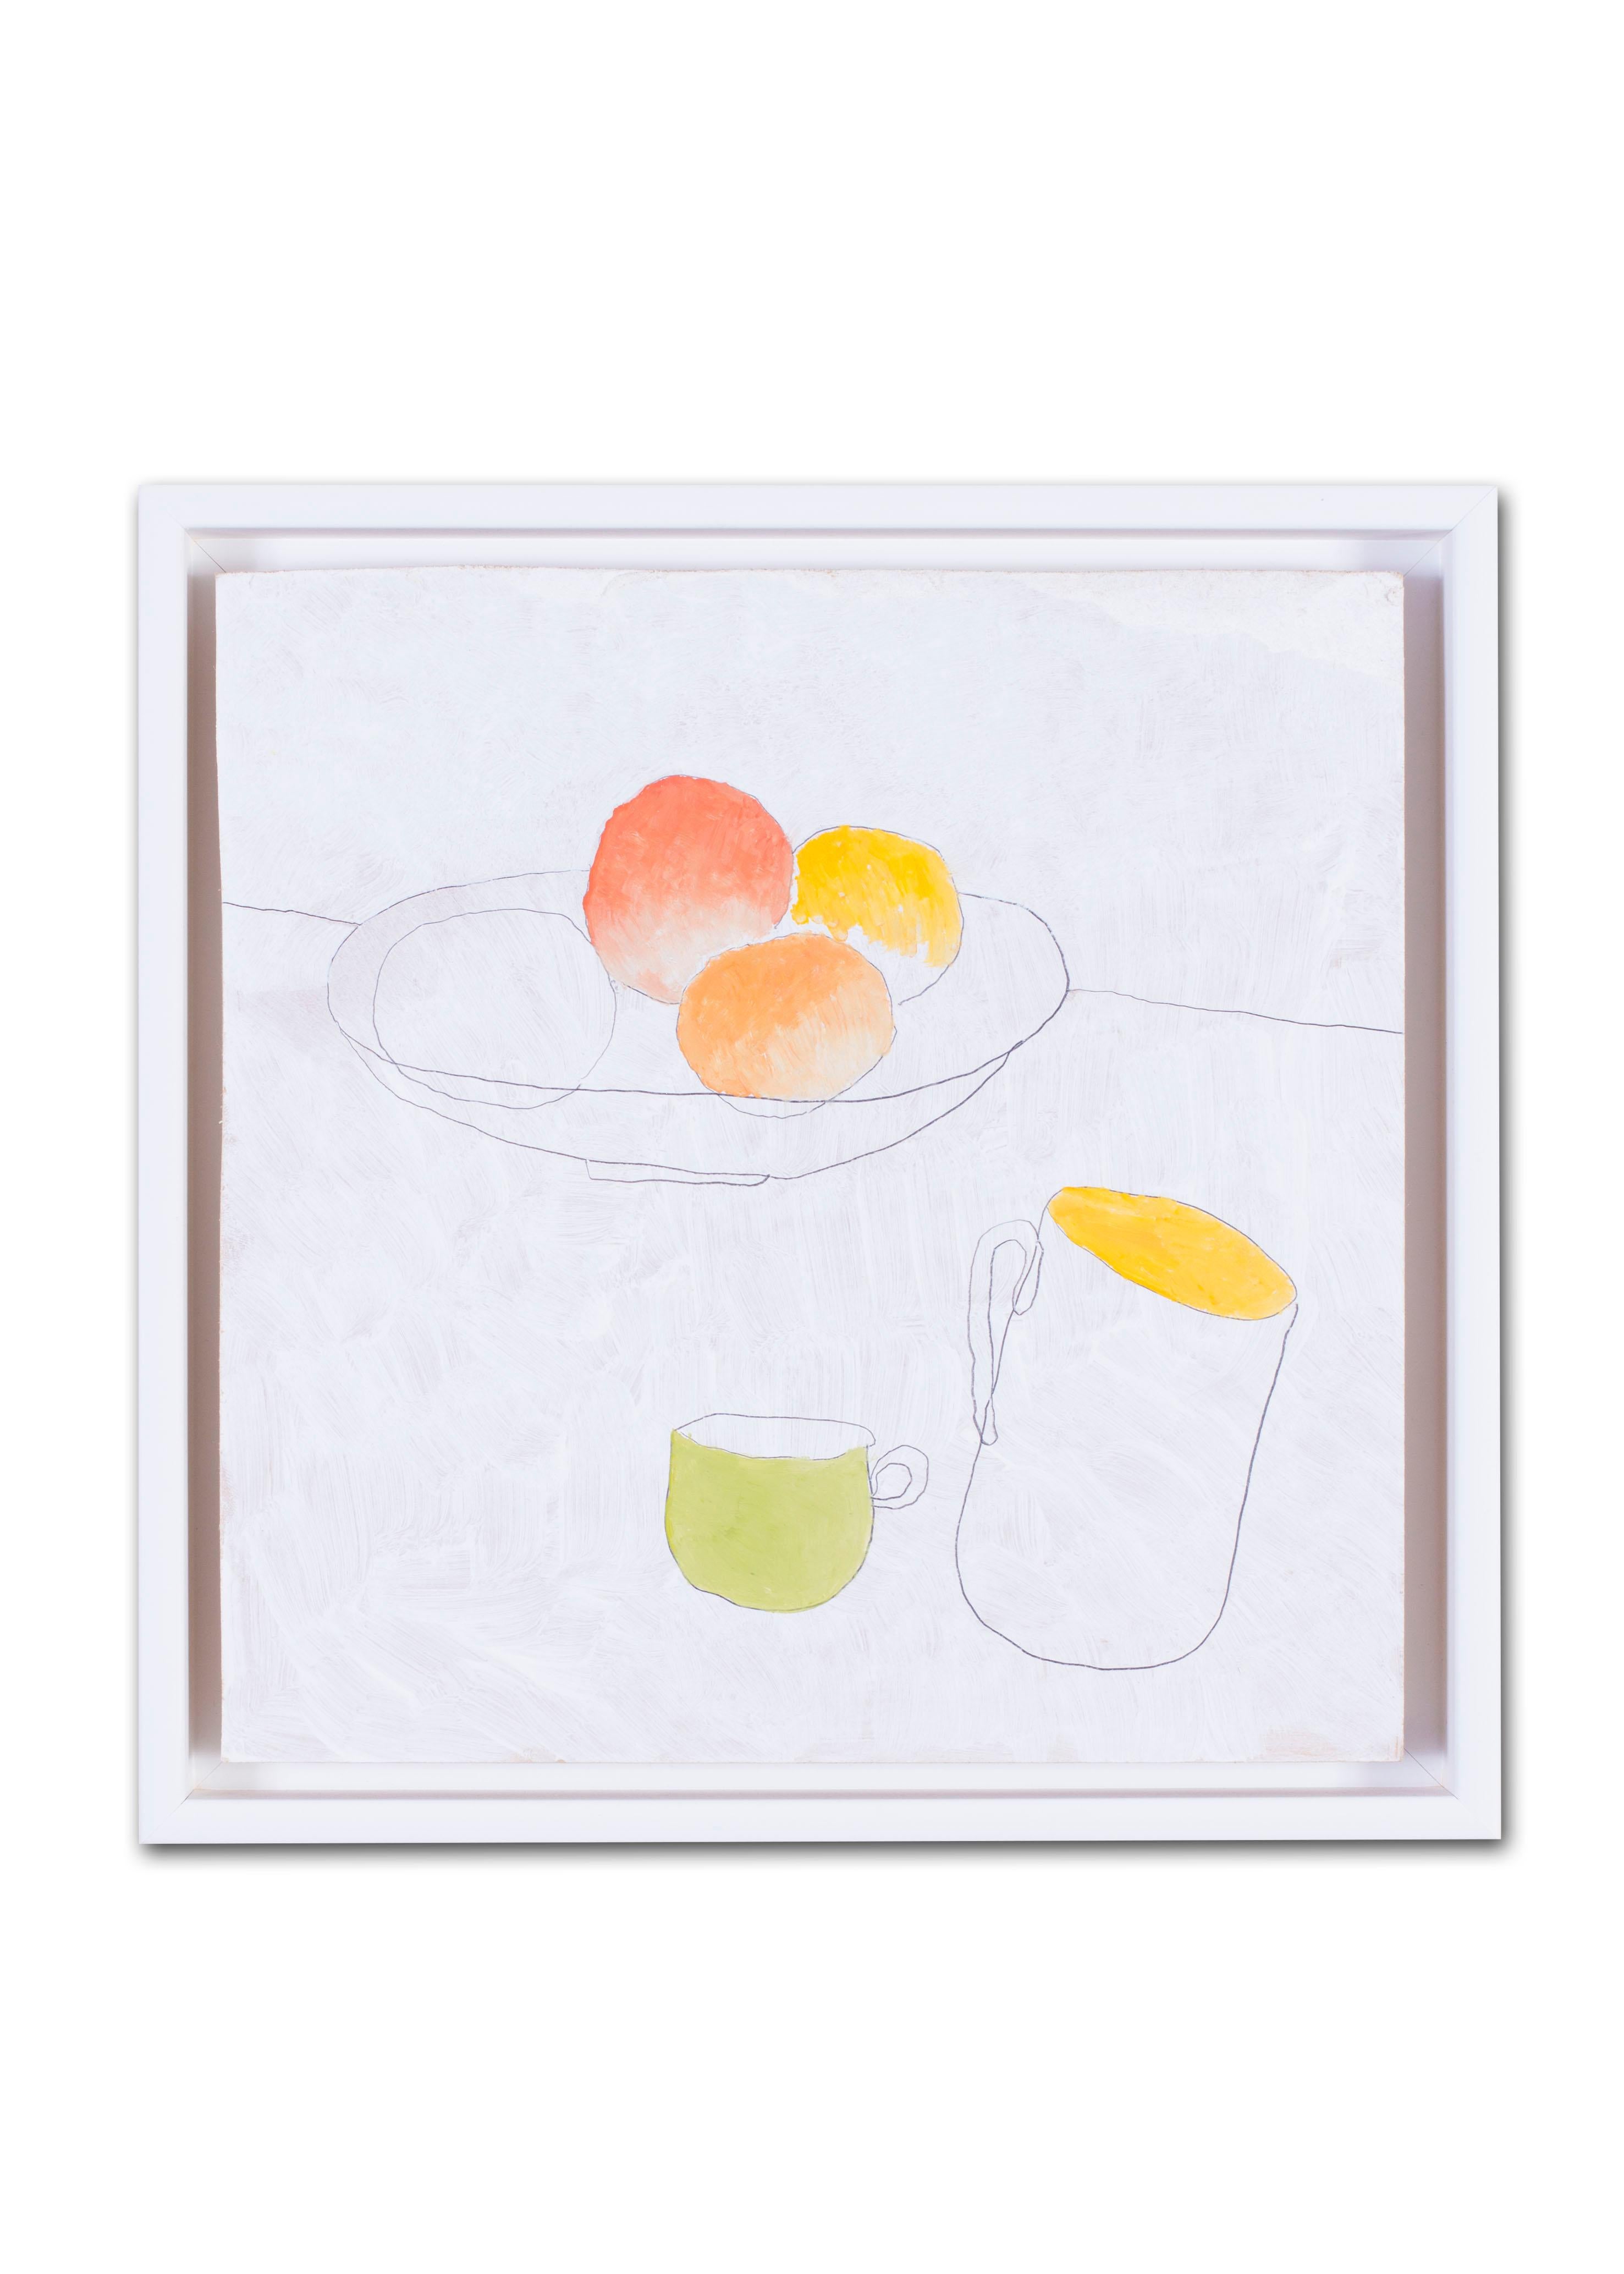 British, 21st Century abstract still life 'Fruit and cups' - Gray Still-Life Painting by Max Andrews